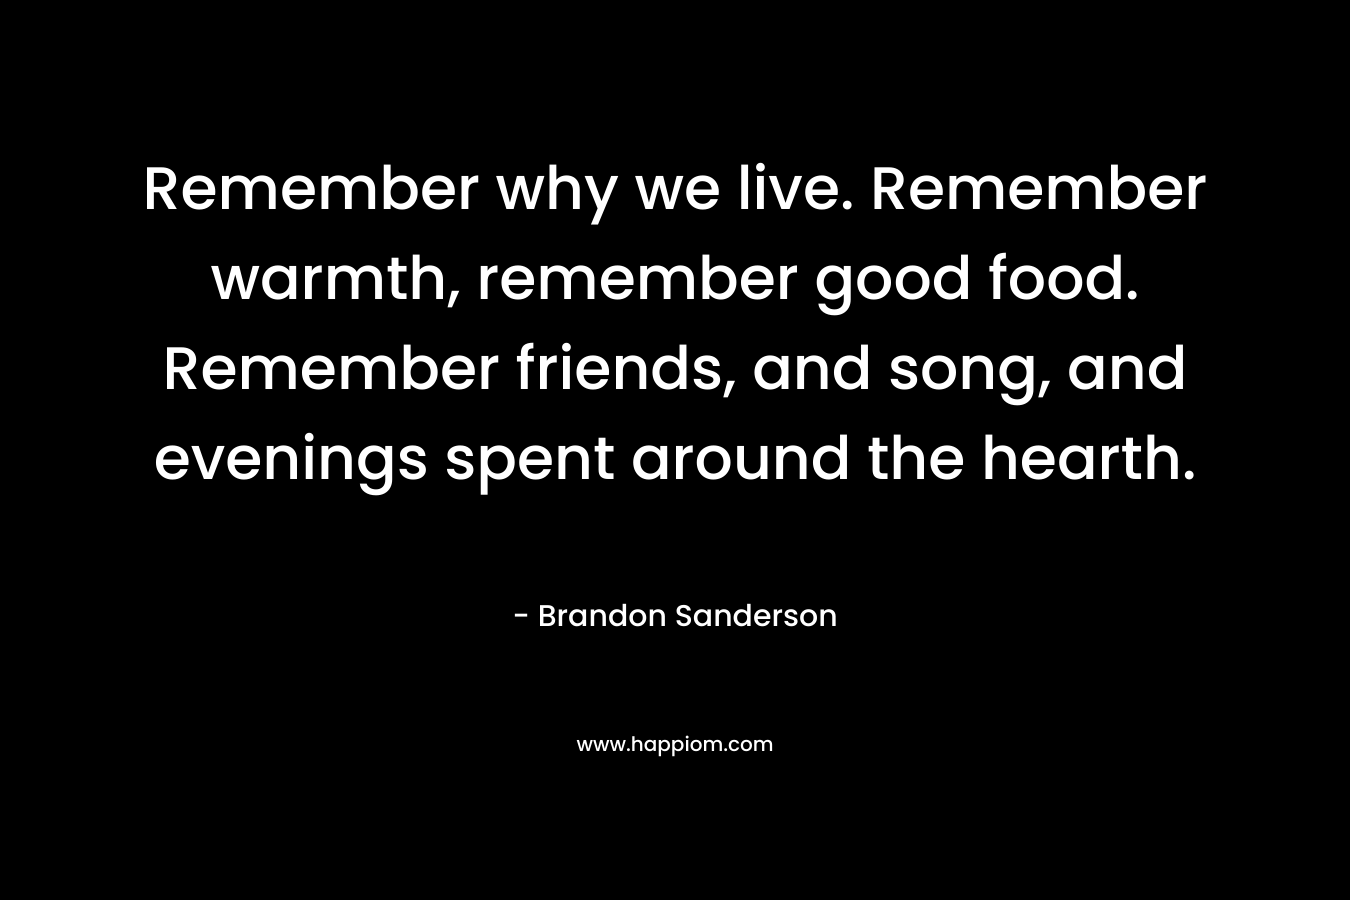 Remember why we live. Remember warmth, remember good food. Remember friends, and song, and evenings spent around the hearth.